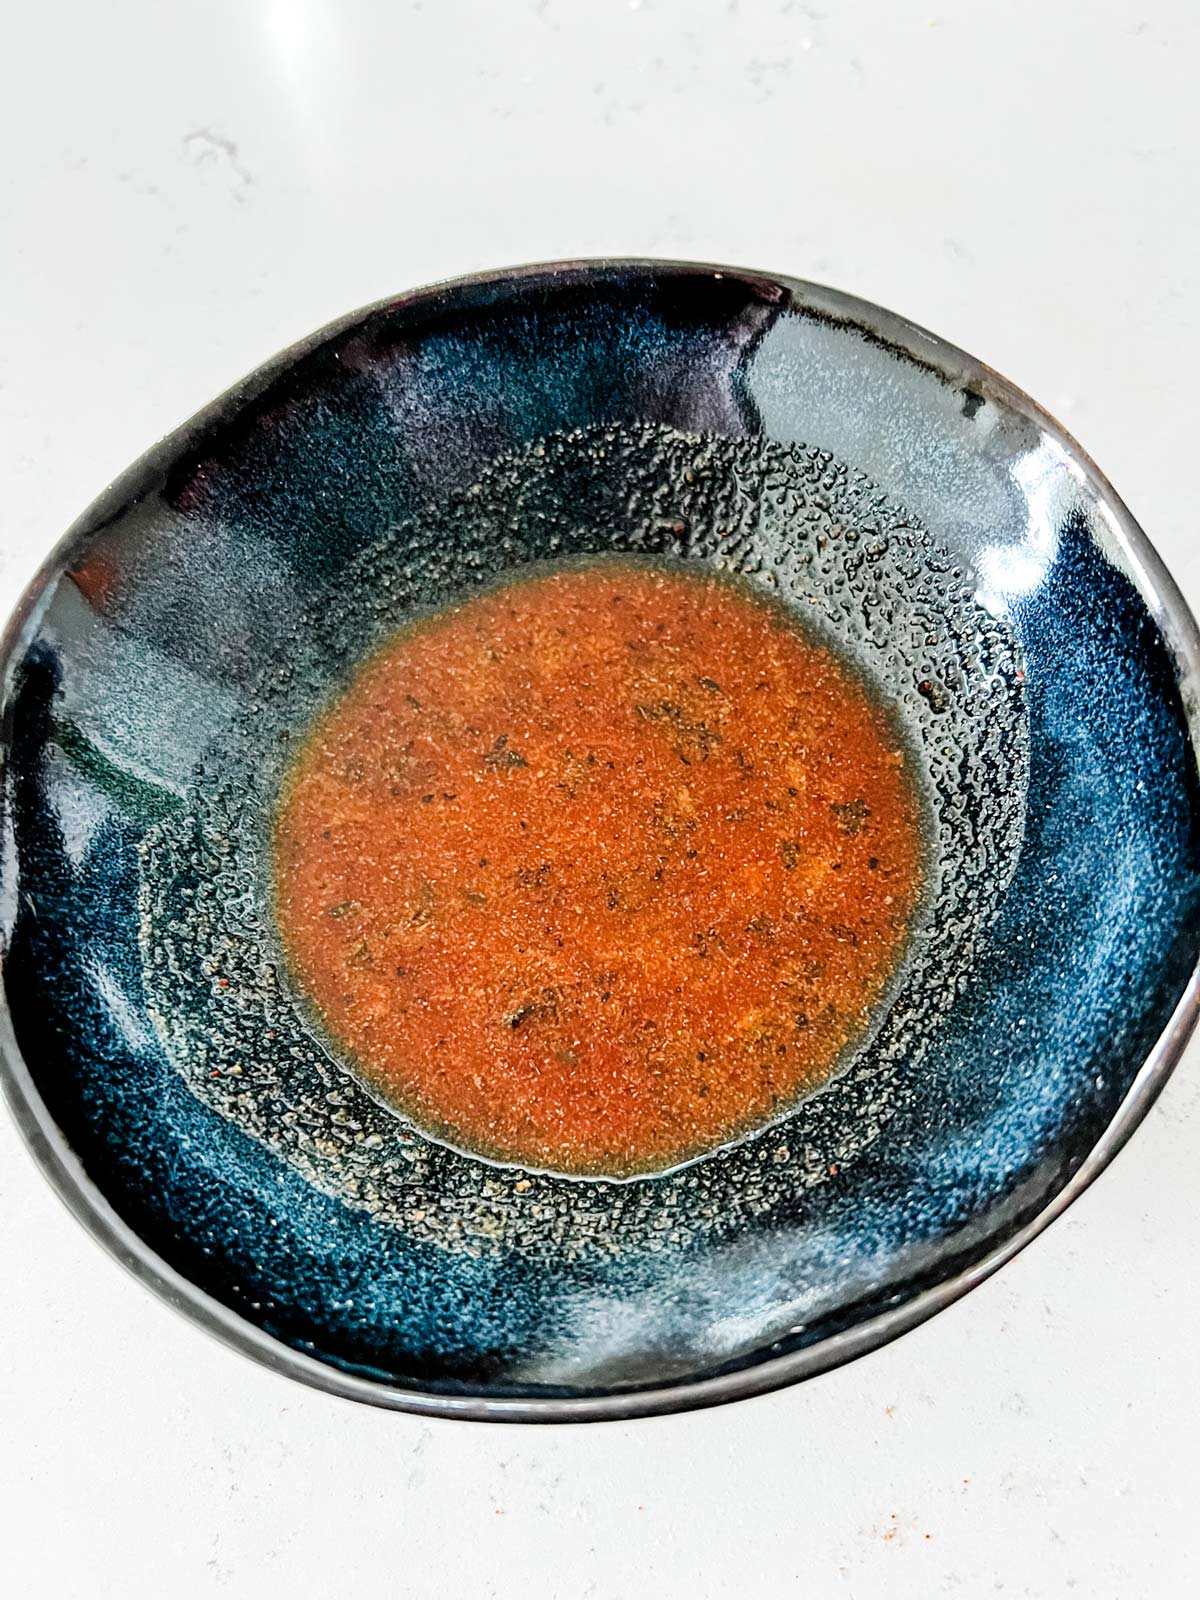 Seasoning mixture in a small blue bowl.